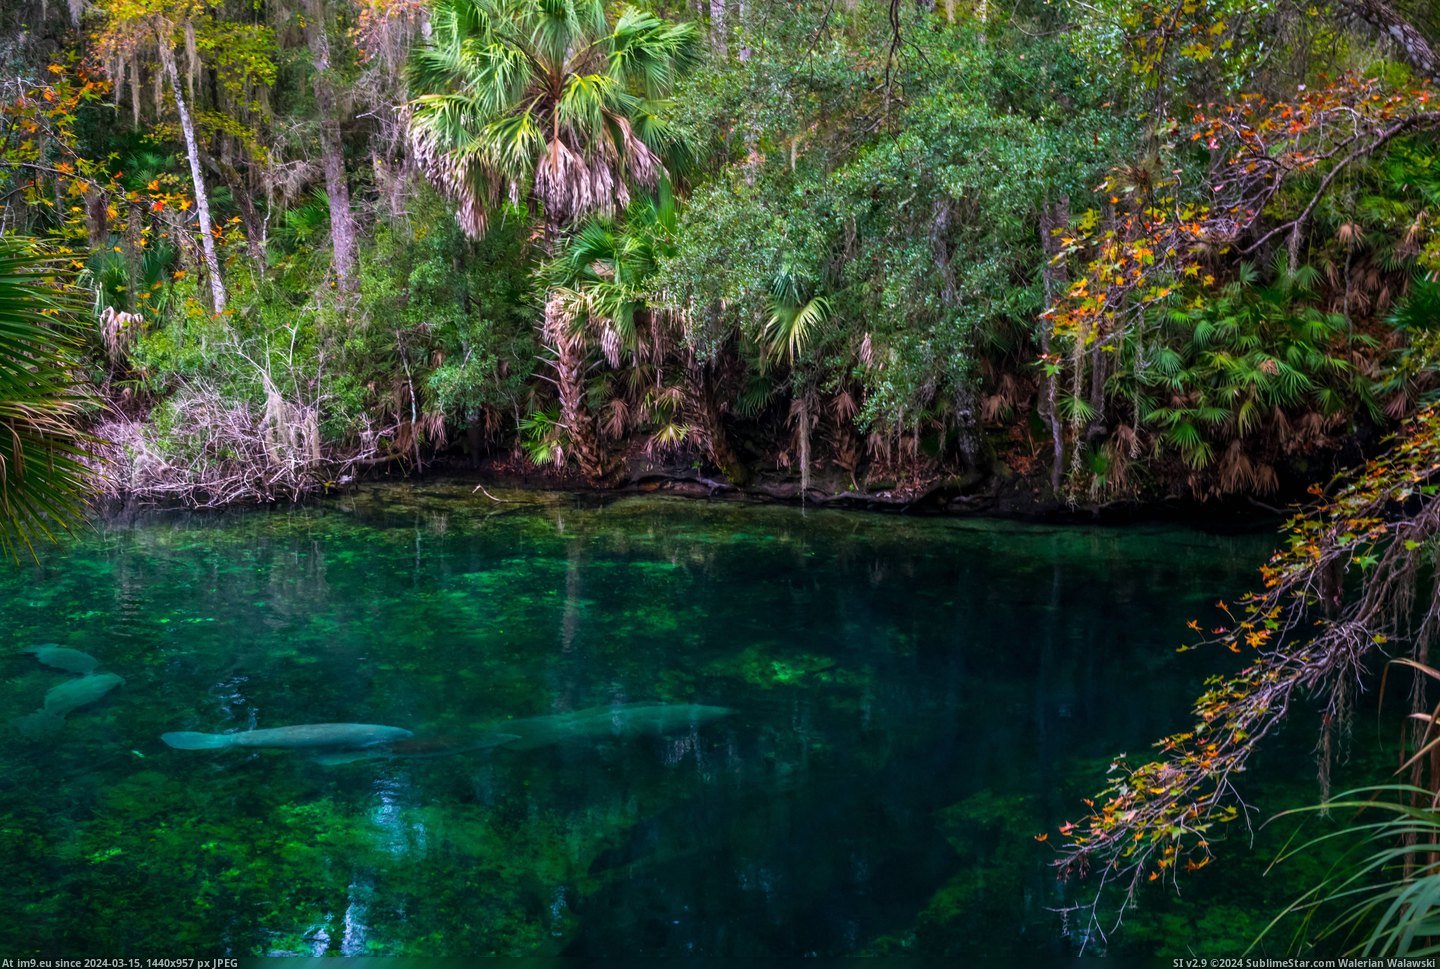 #Blue #Spring #Springs #Florida #Opening [Earthporn] Opening of the Spring, Blue Springs, Florida [4000x6000] [OC] Pic. (Изображение из альбом My r/EARTHPORN favs))